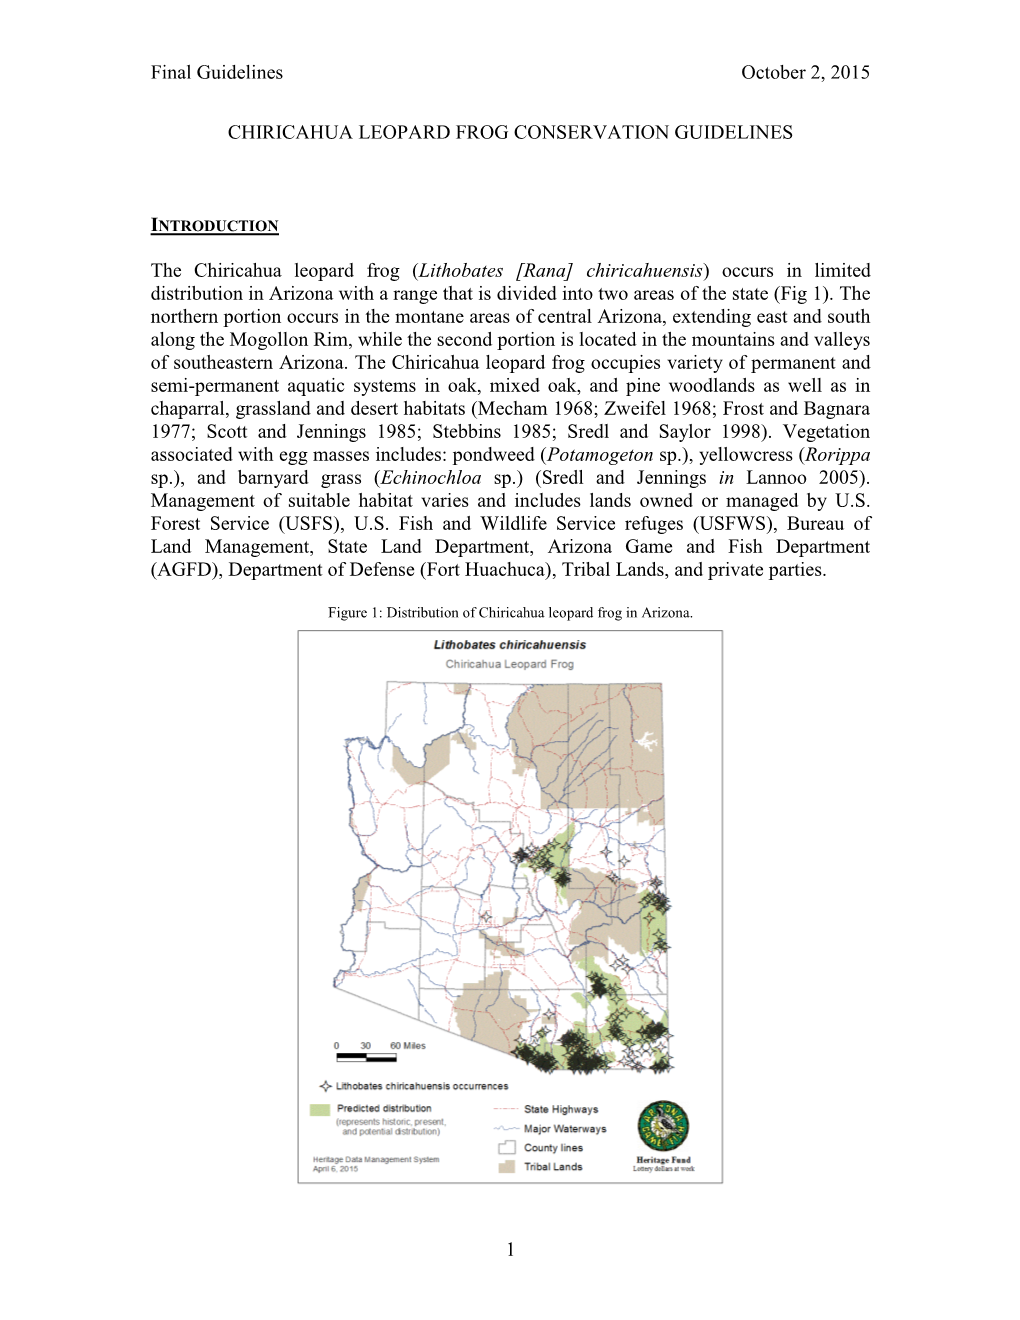 Chiricahua Leopard Frog Conservation Guidelines